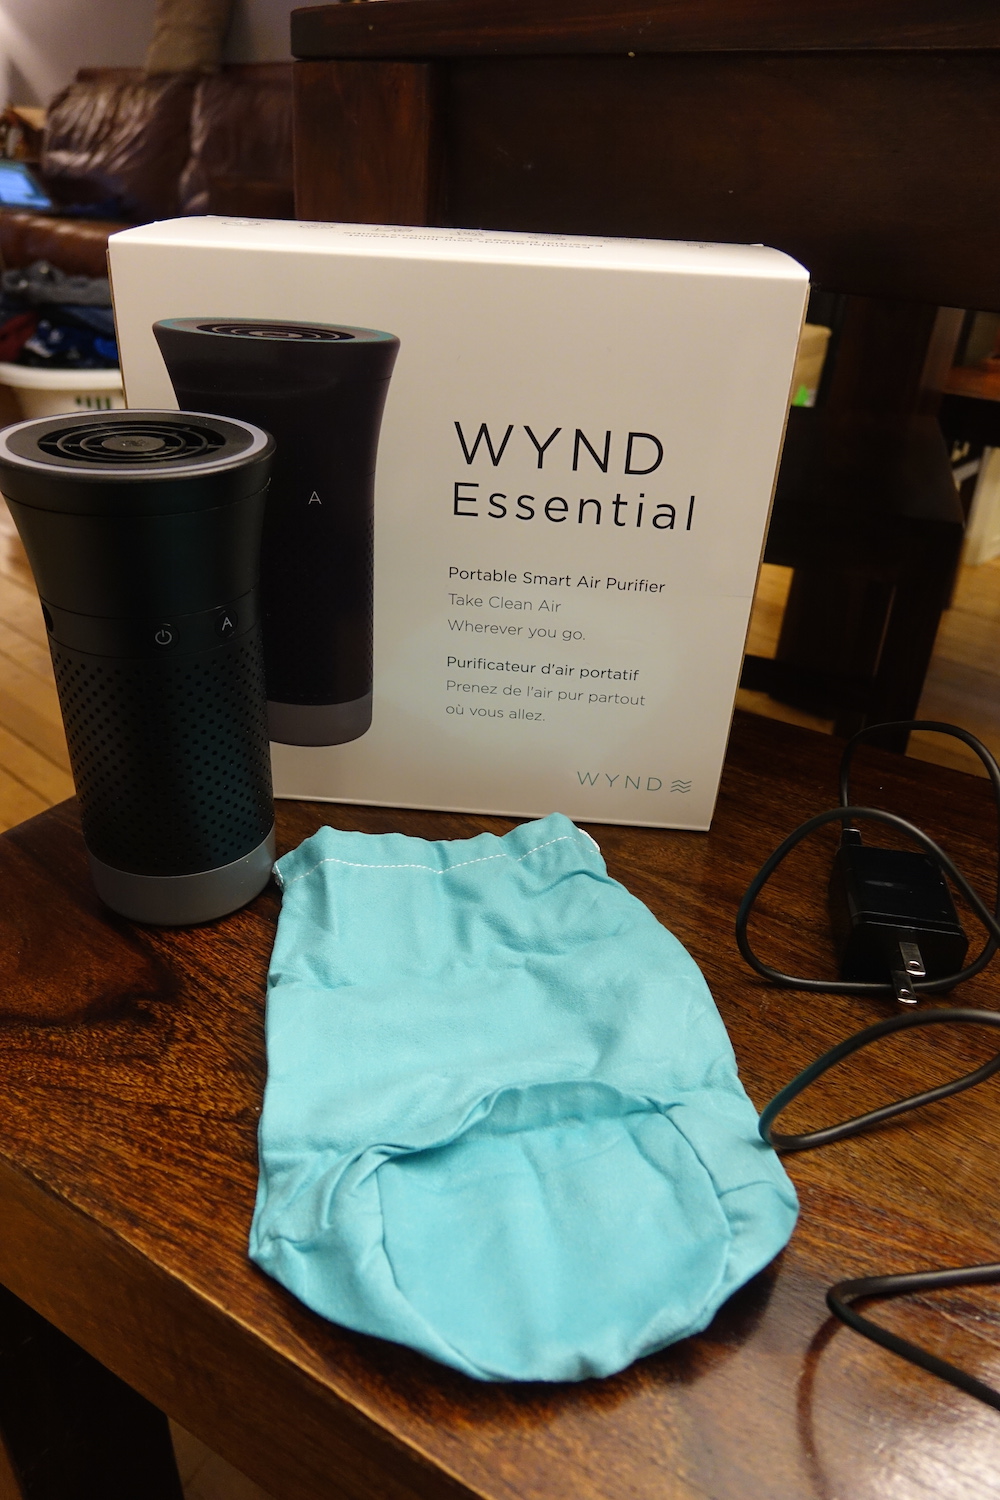 wind essential personal air purifier review - wynd essential smart air purifier in box